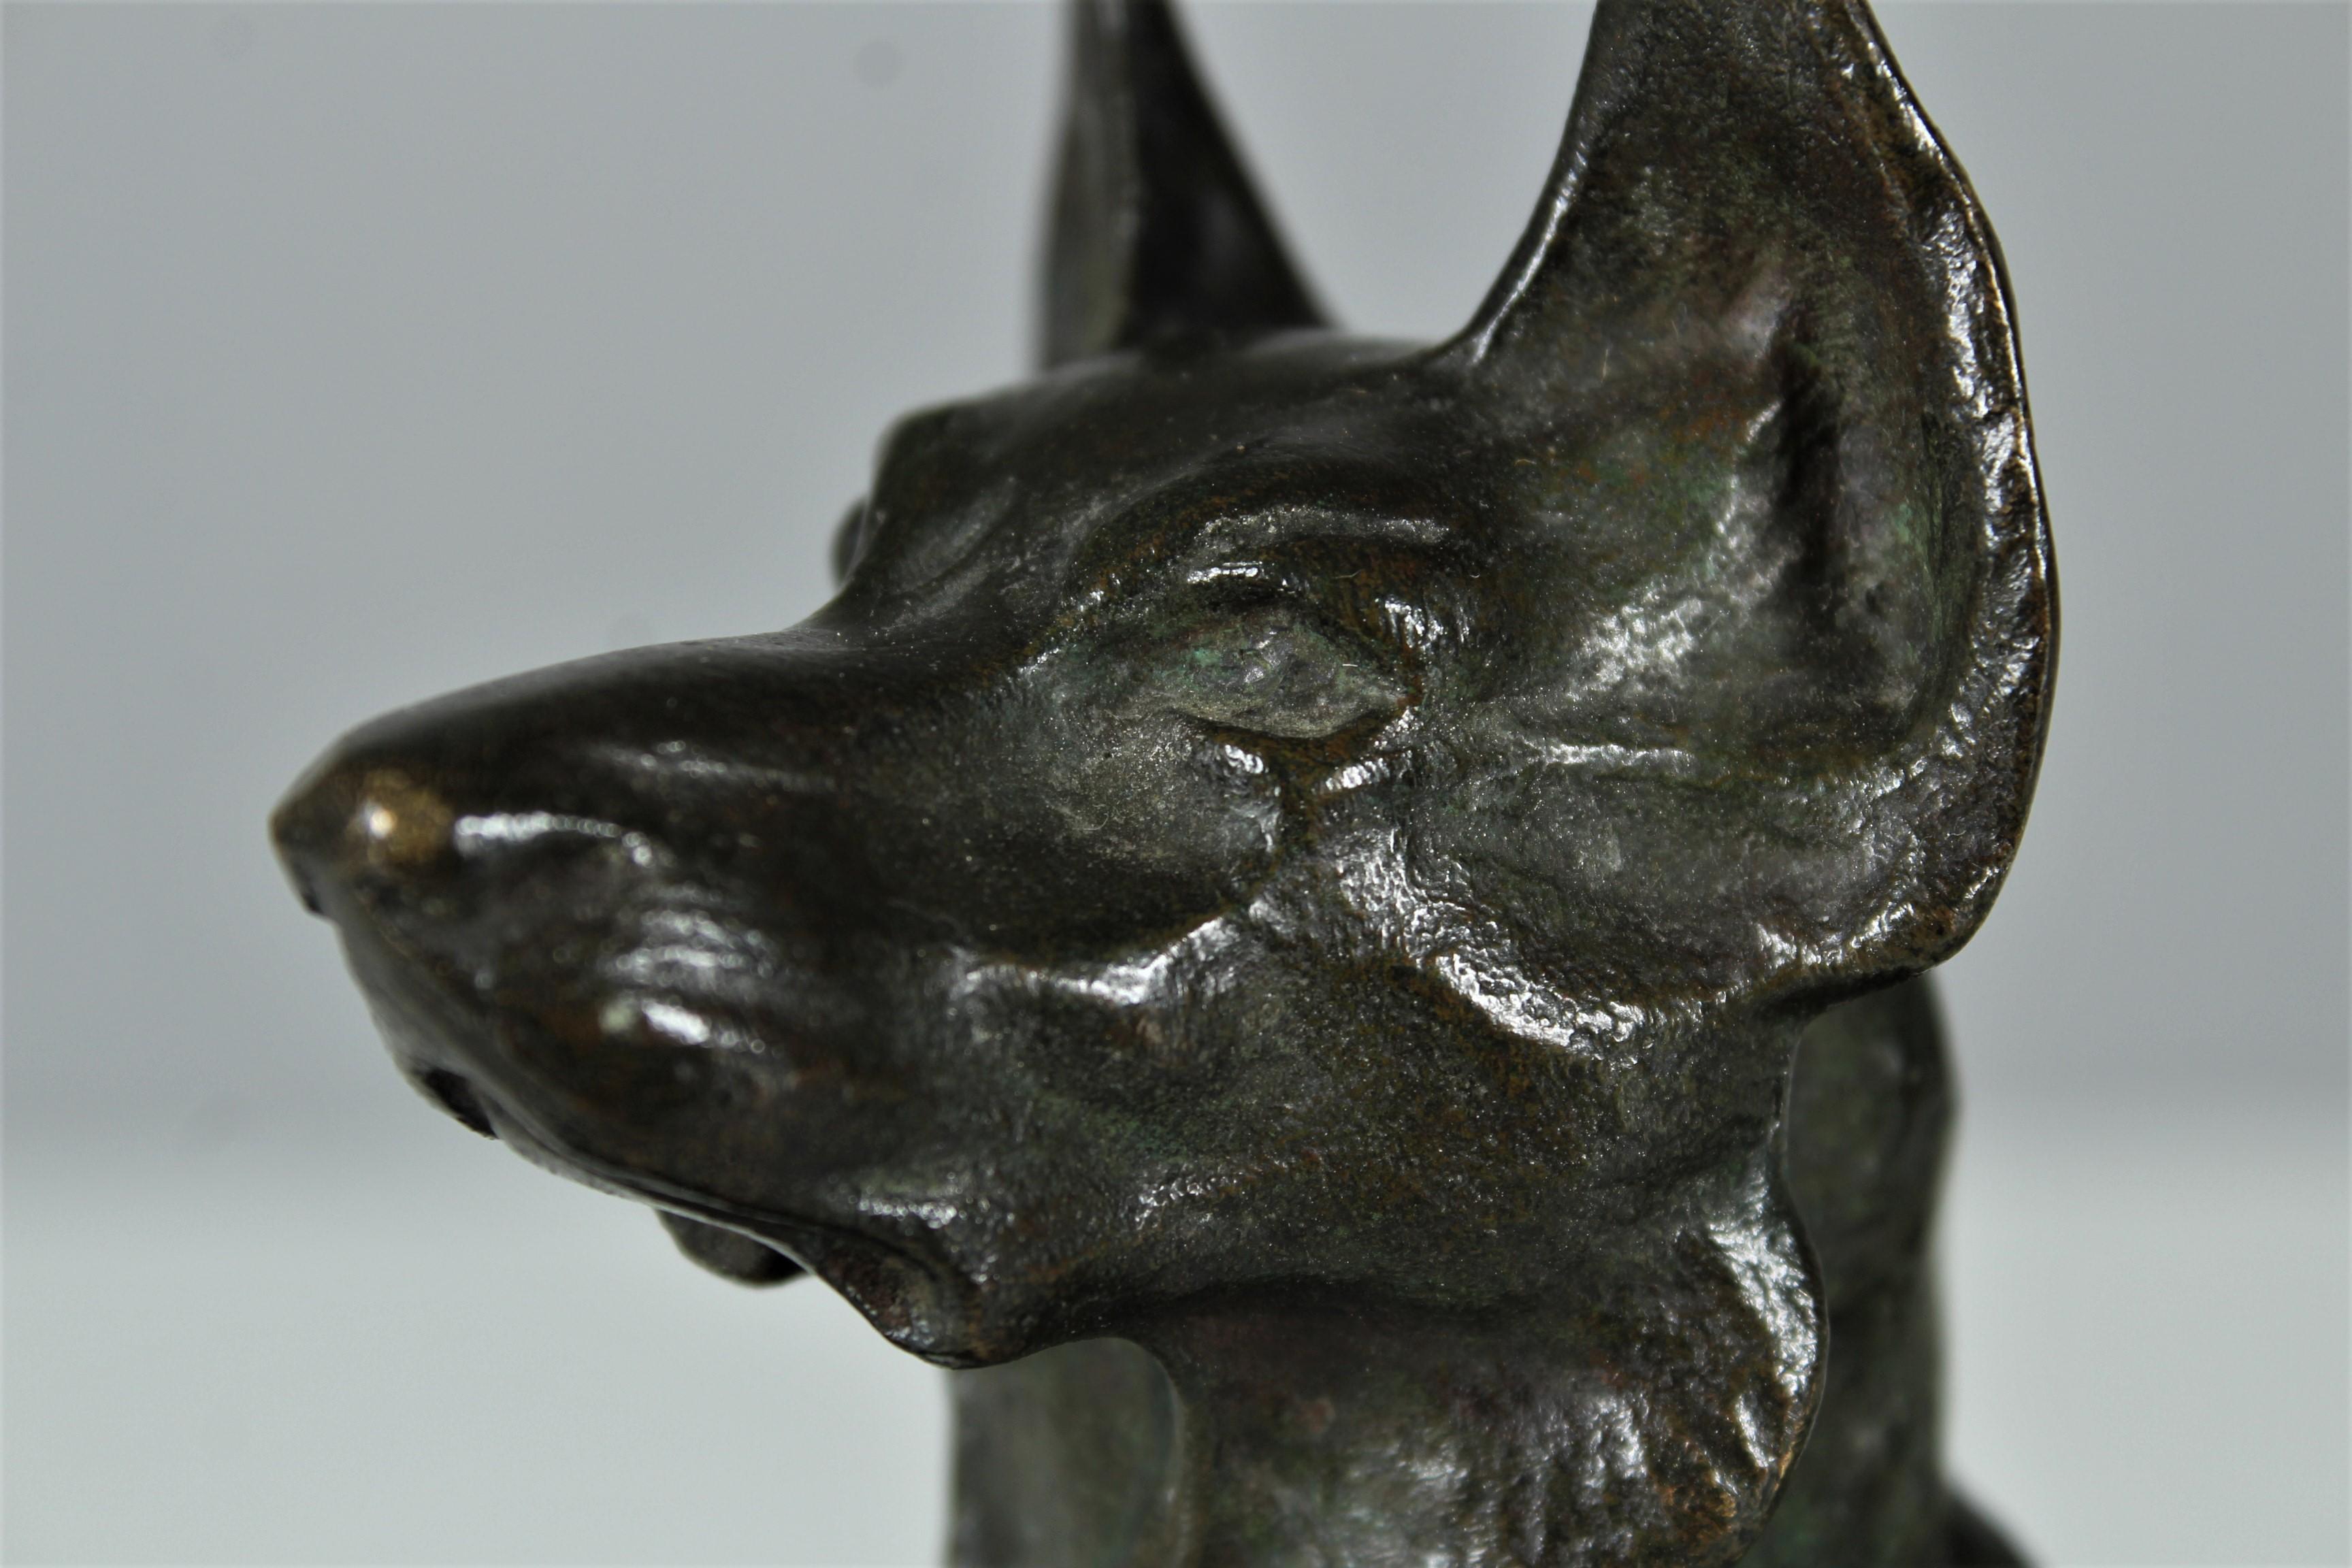 French Antique Shepherd Dog Sculpture, Signed by Artist 